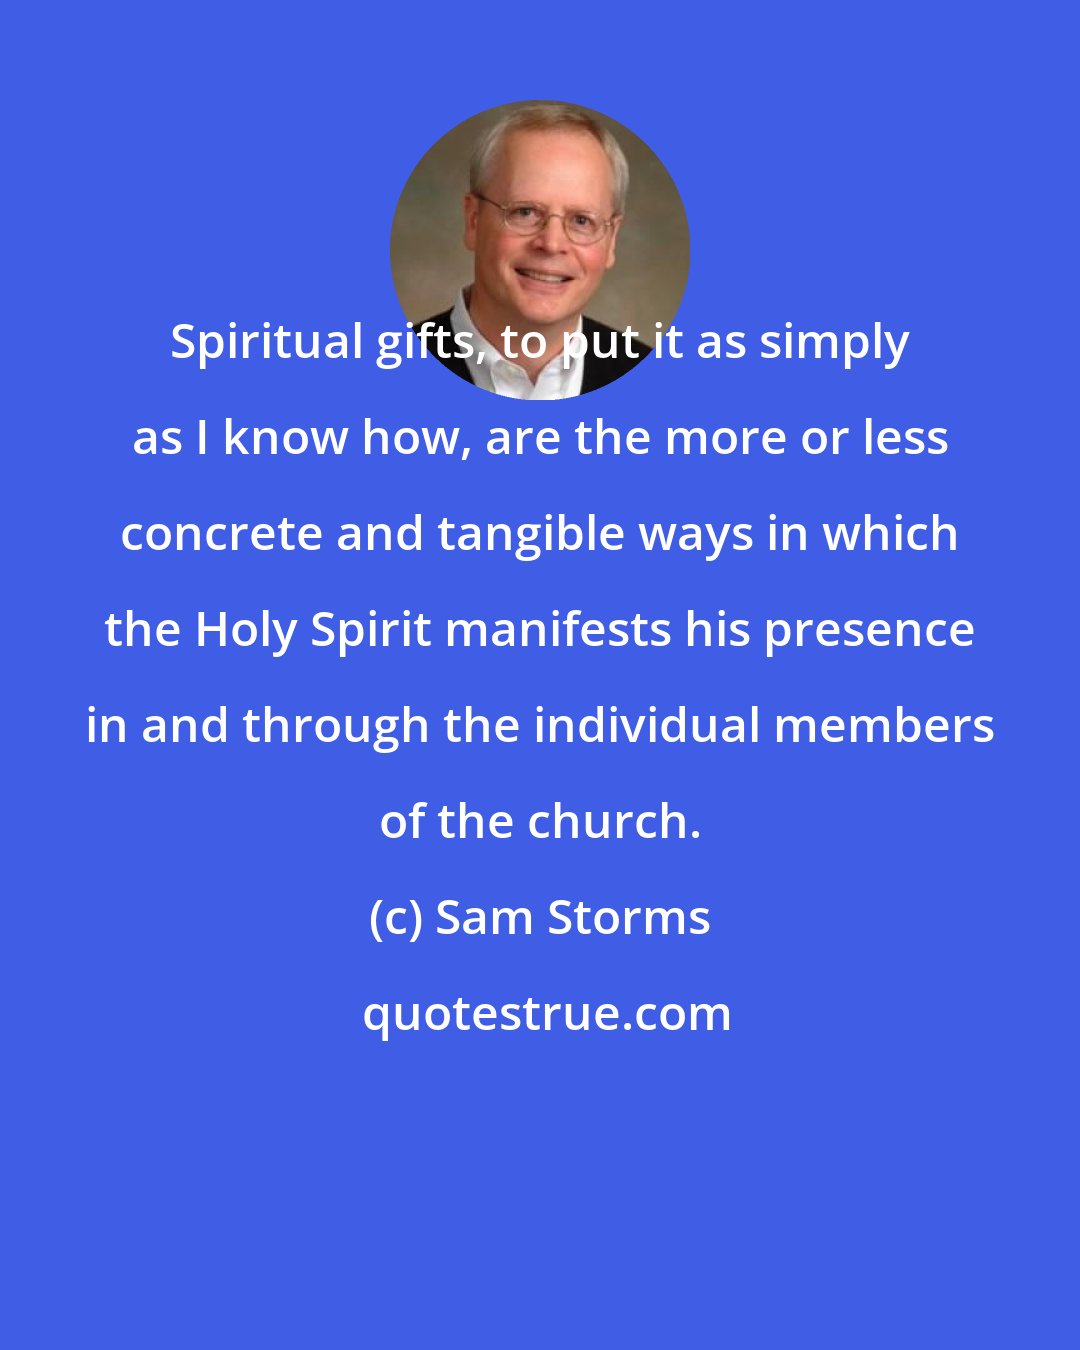 Sam Storms: Spiritual gifts, to put it as simply as I know how, are the more or less concrete and tangible ways in which the Holy Spirit manifests his presence in and through the individual members of the church.